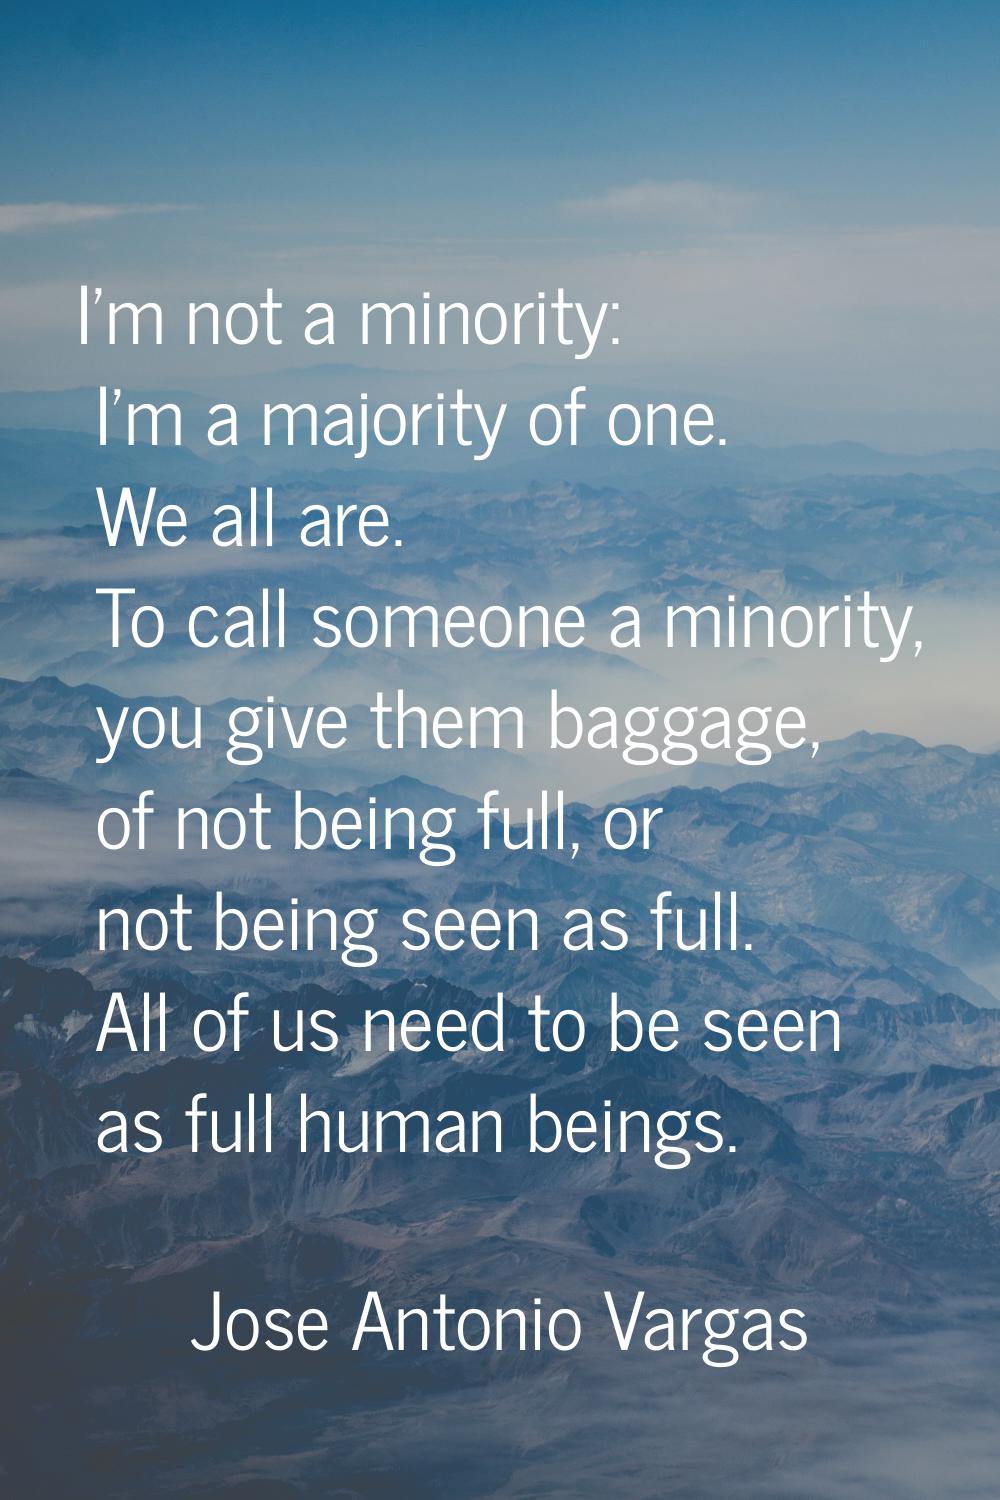 I'm not a minority: I'm a majority of one. We all are. To call someone a minority, you give them ba